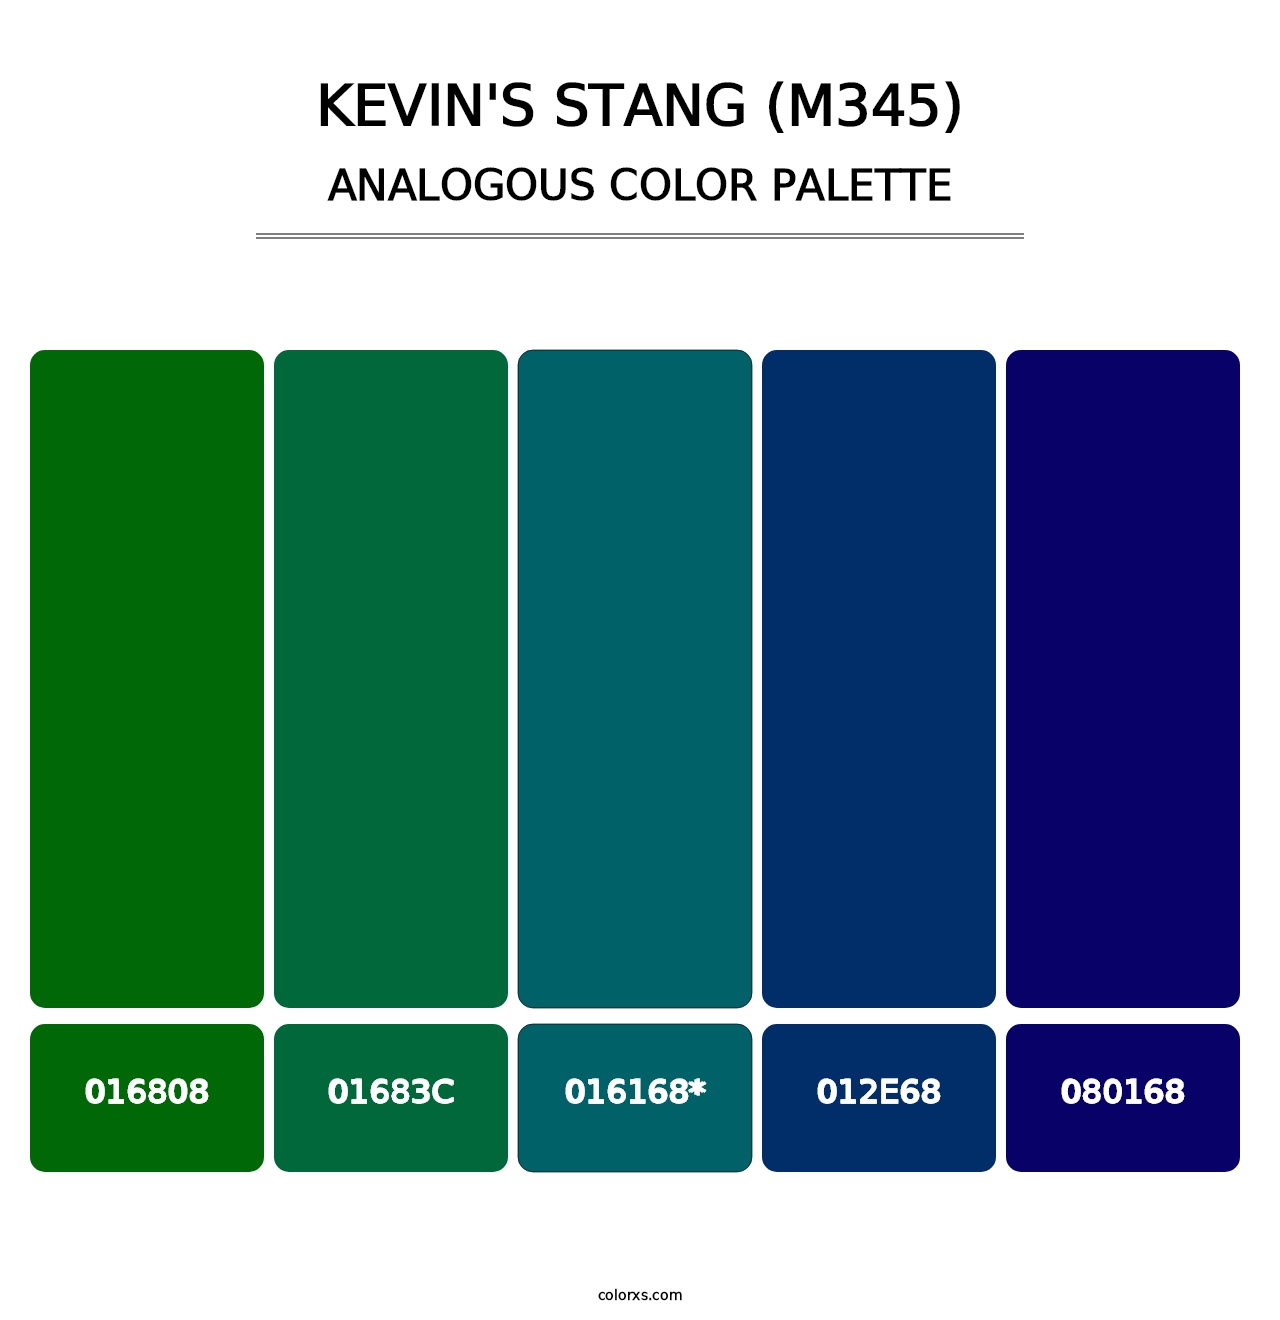 Kevin's Stang (M345) - Analogous Color Palette